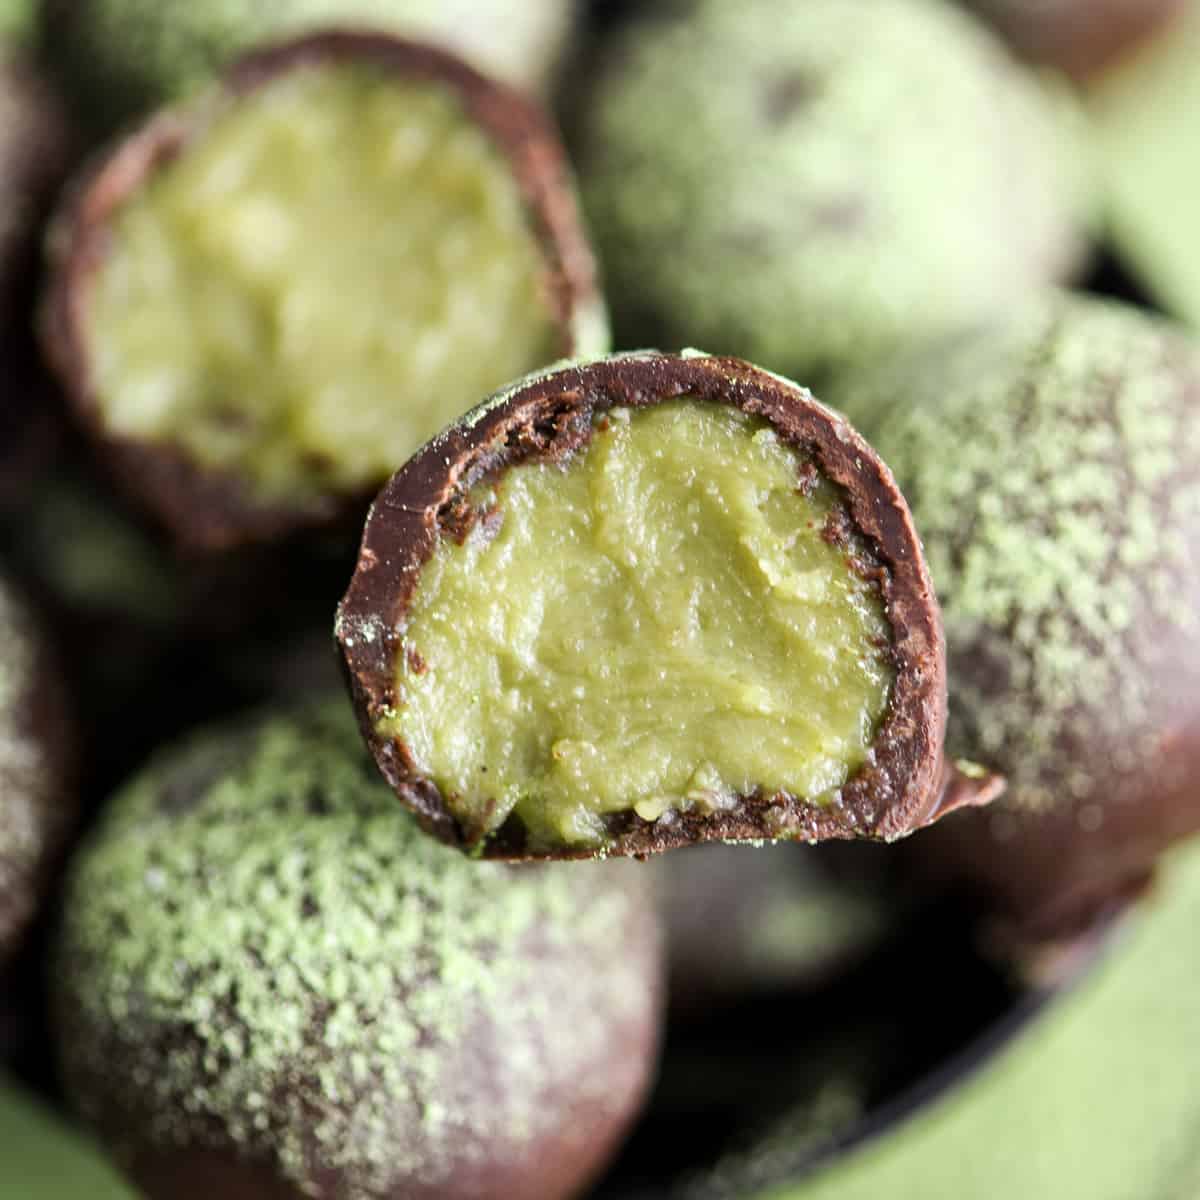 a Healthy Matcha Truffle cut in half so you can see the inside